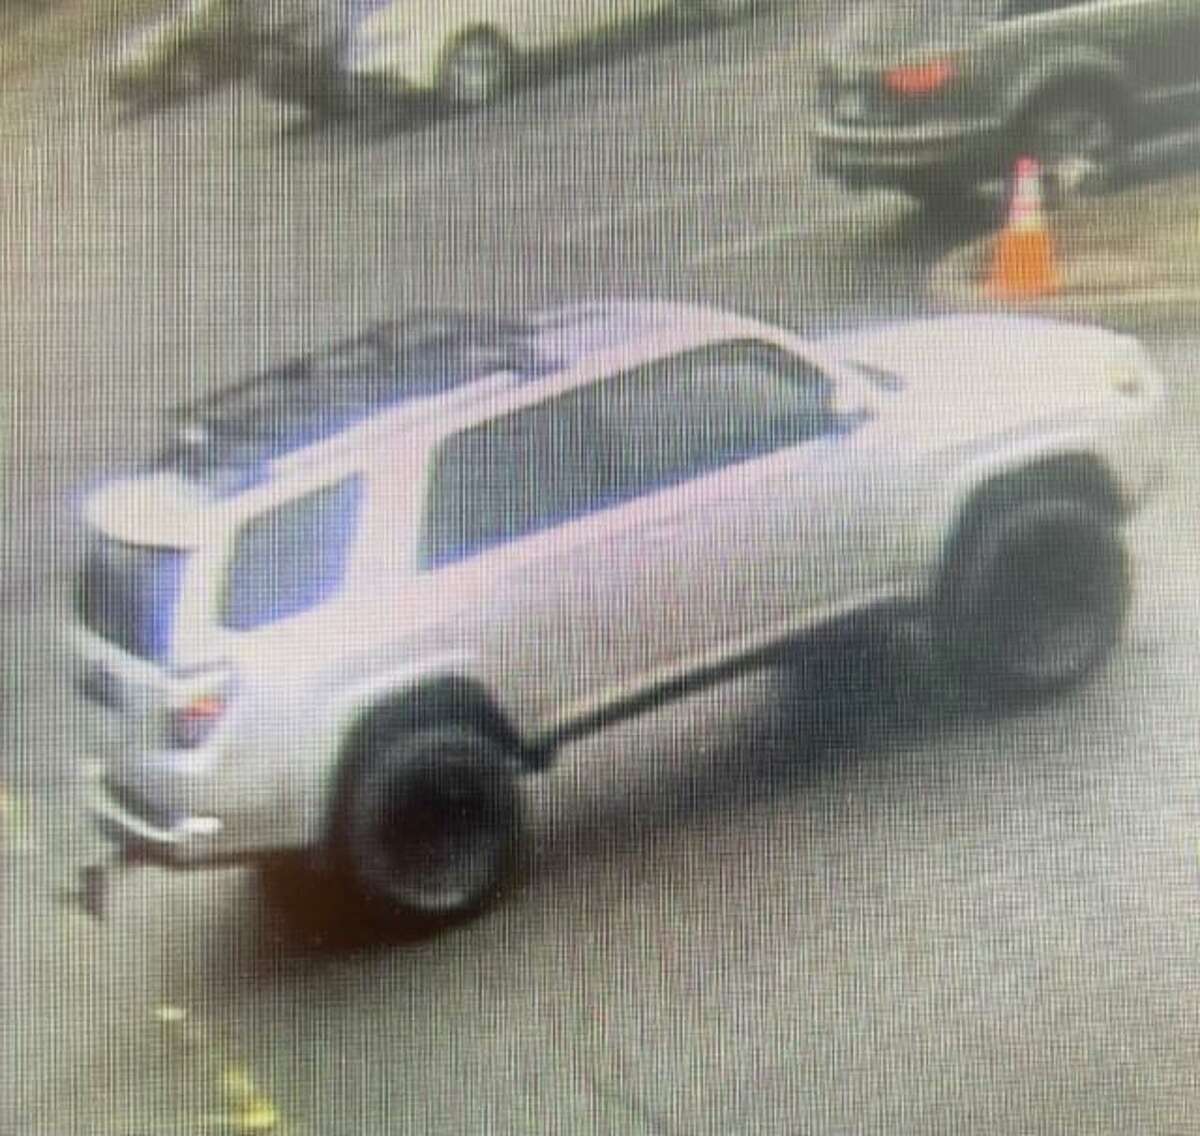 Police are looking for this vehicle of interest connected to a larceny of various musical instruments from Ridgefield High School earlier this year.